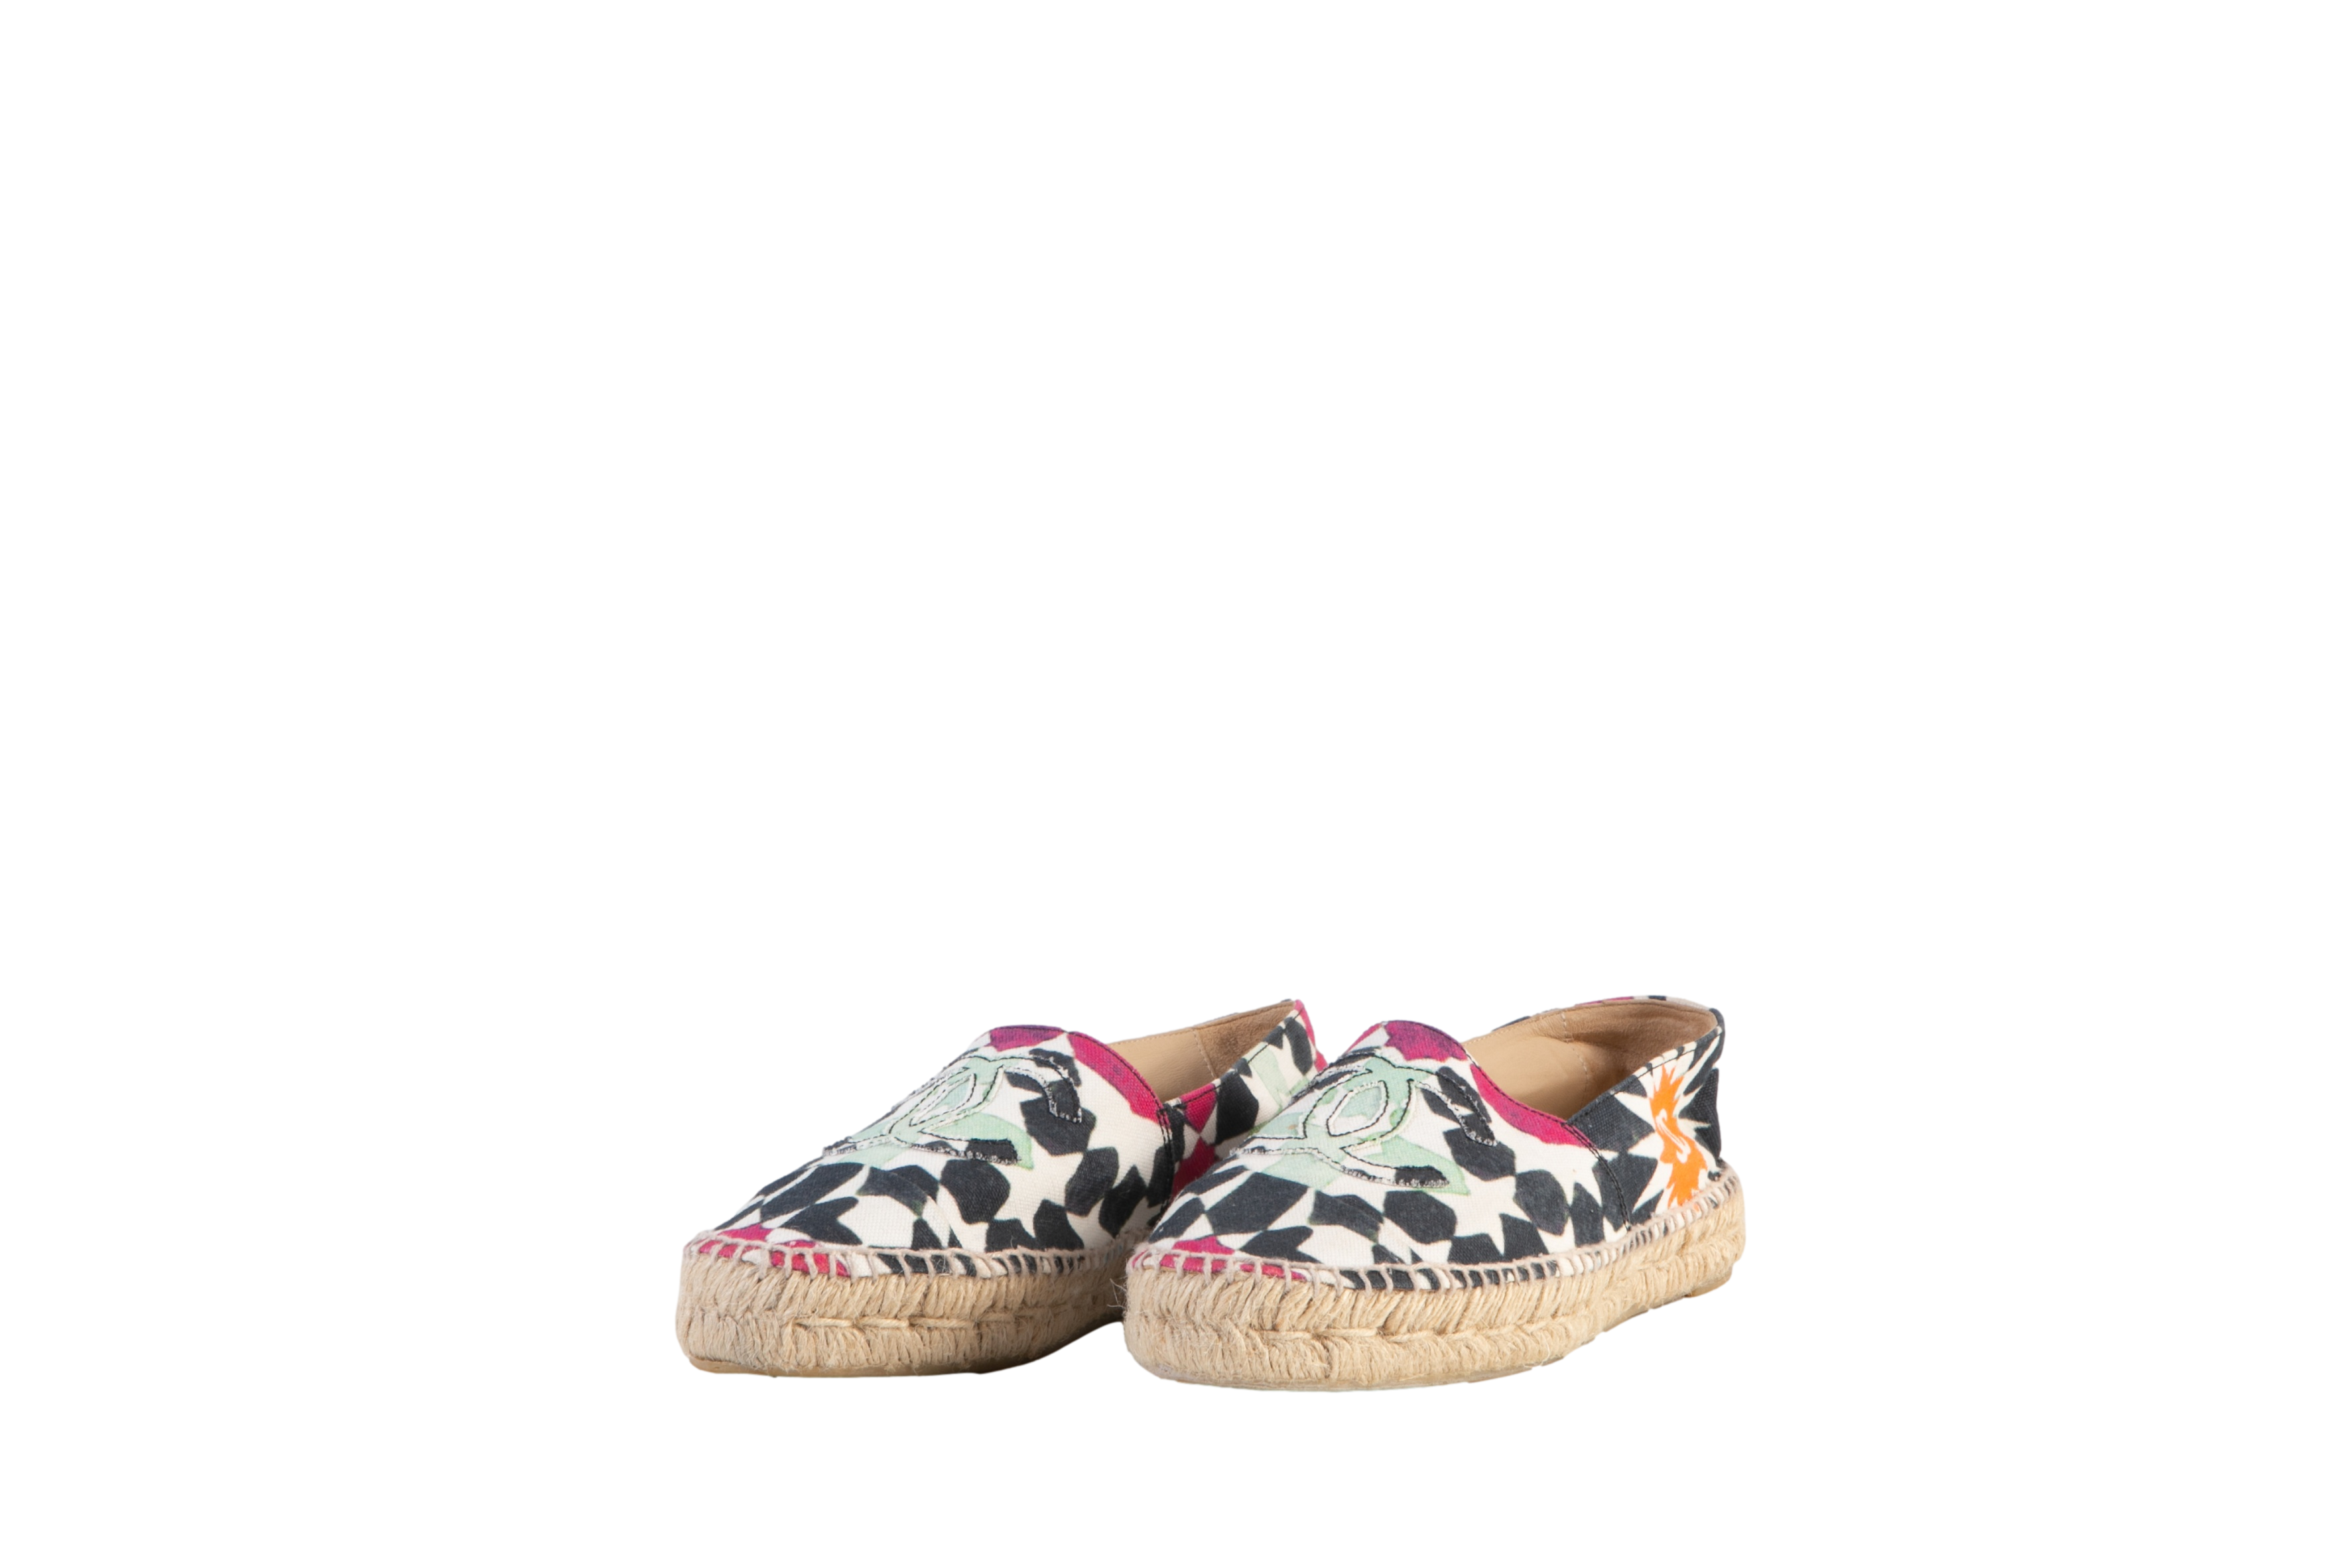 DESAPEGO THASSIA NAVES CHANEL ESPADRILLE COLORS